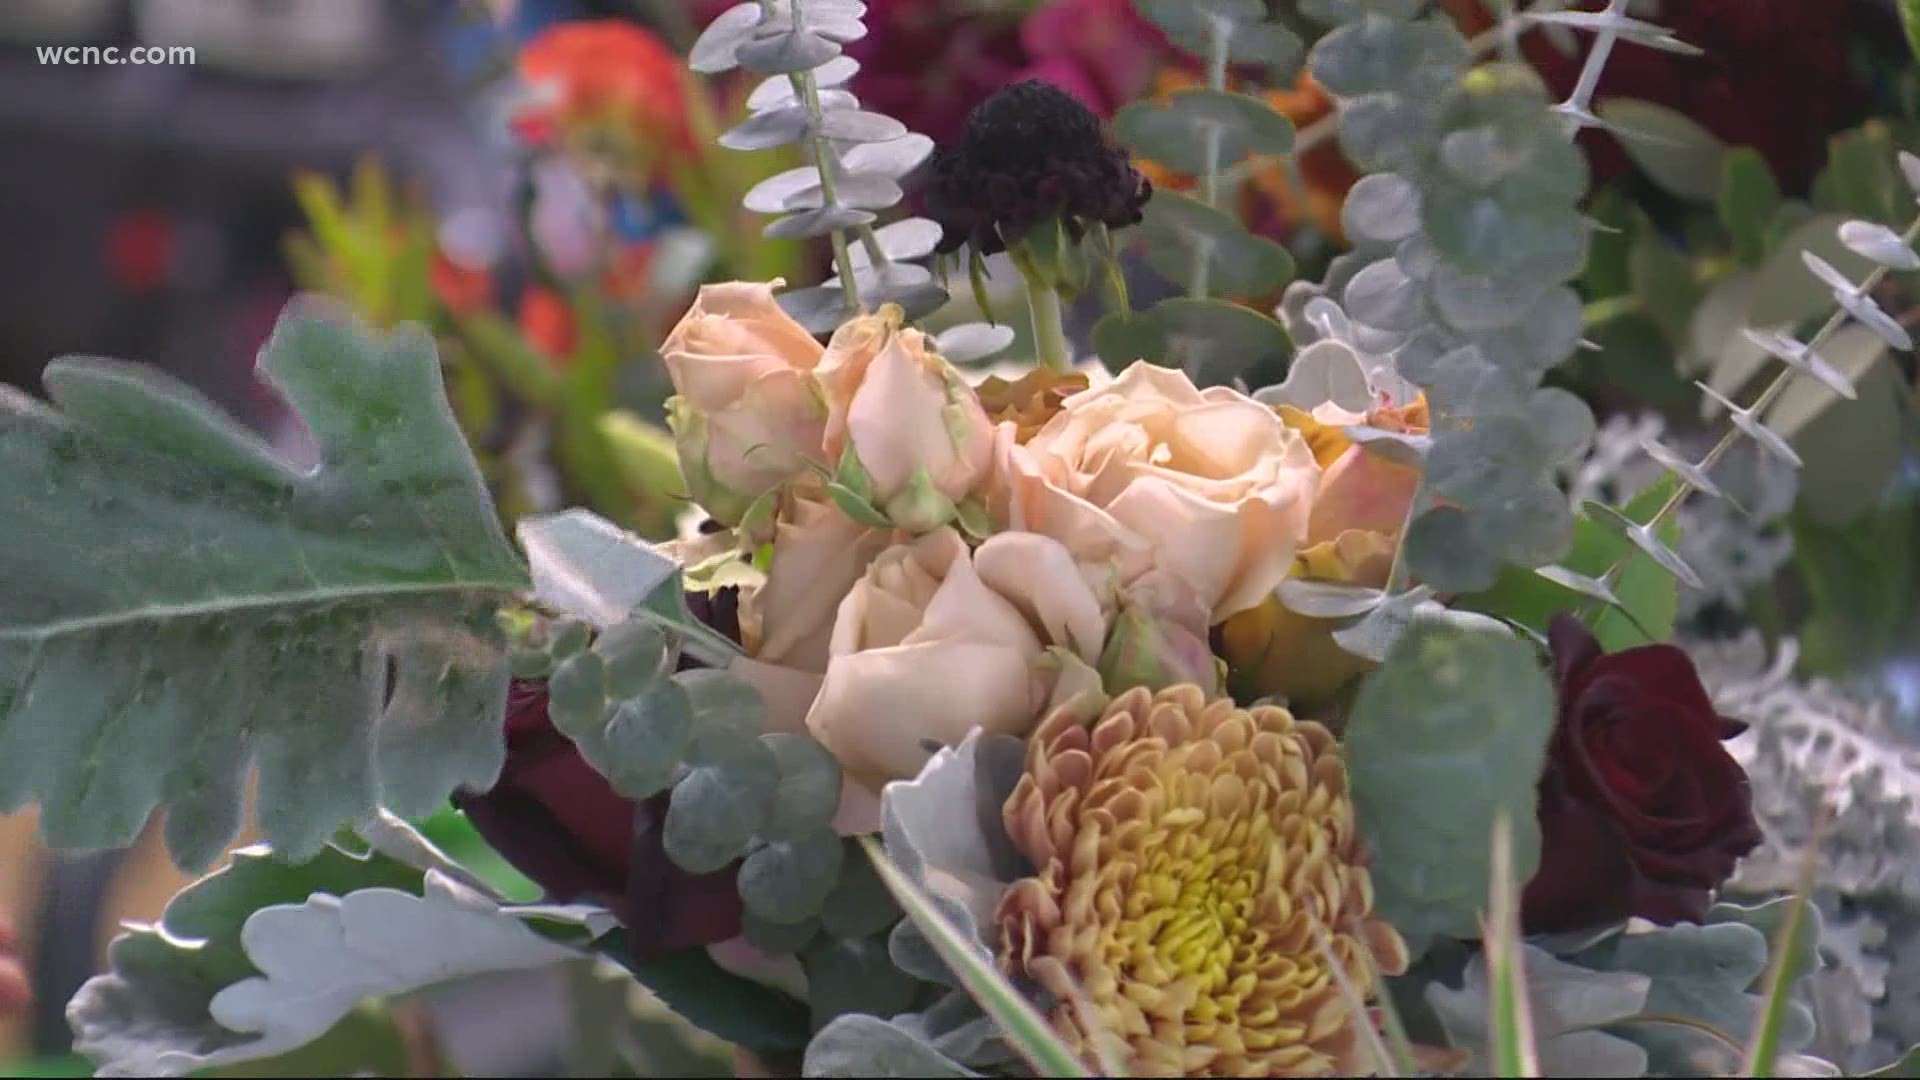 Ashley Manning is creating unique flower arrangements with other items thanks to the community to deliver to widows around the community this Valentine's.